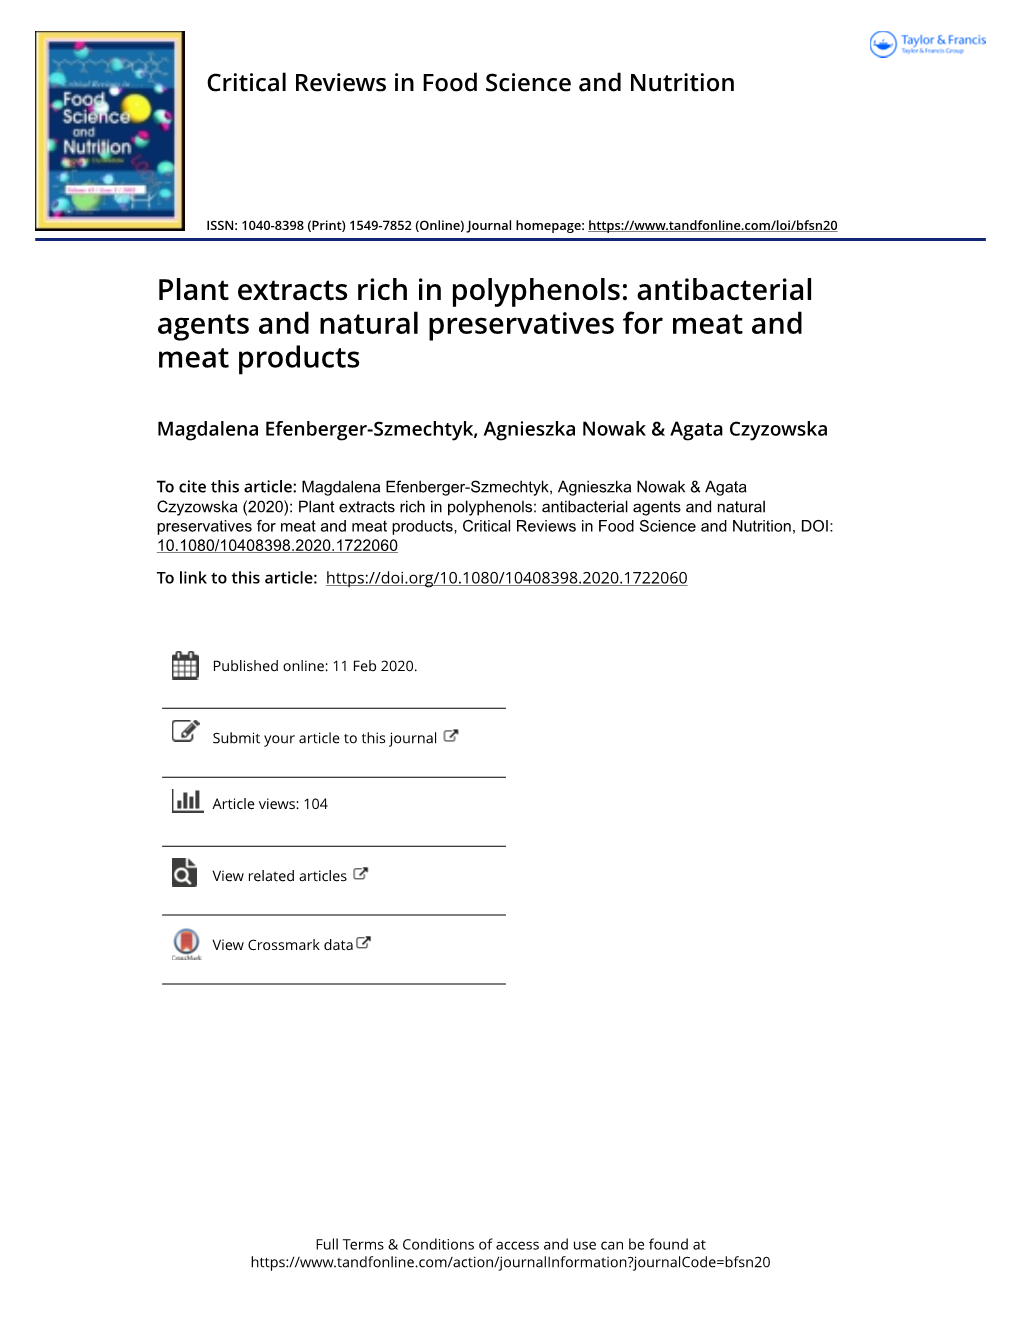 Plant Extracts Rich in Polyphenols: Antibacterial Agents and Natural Preservatives for Meat and Meat Products